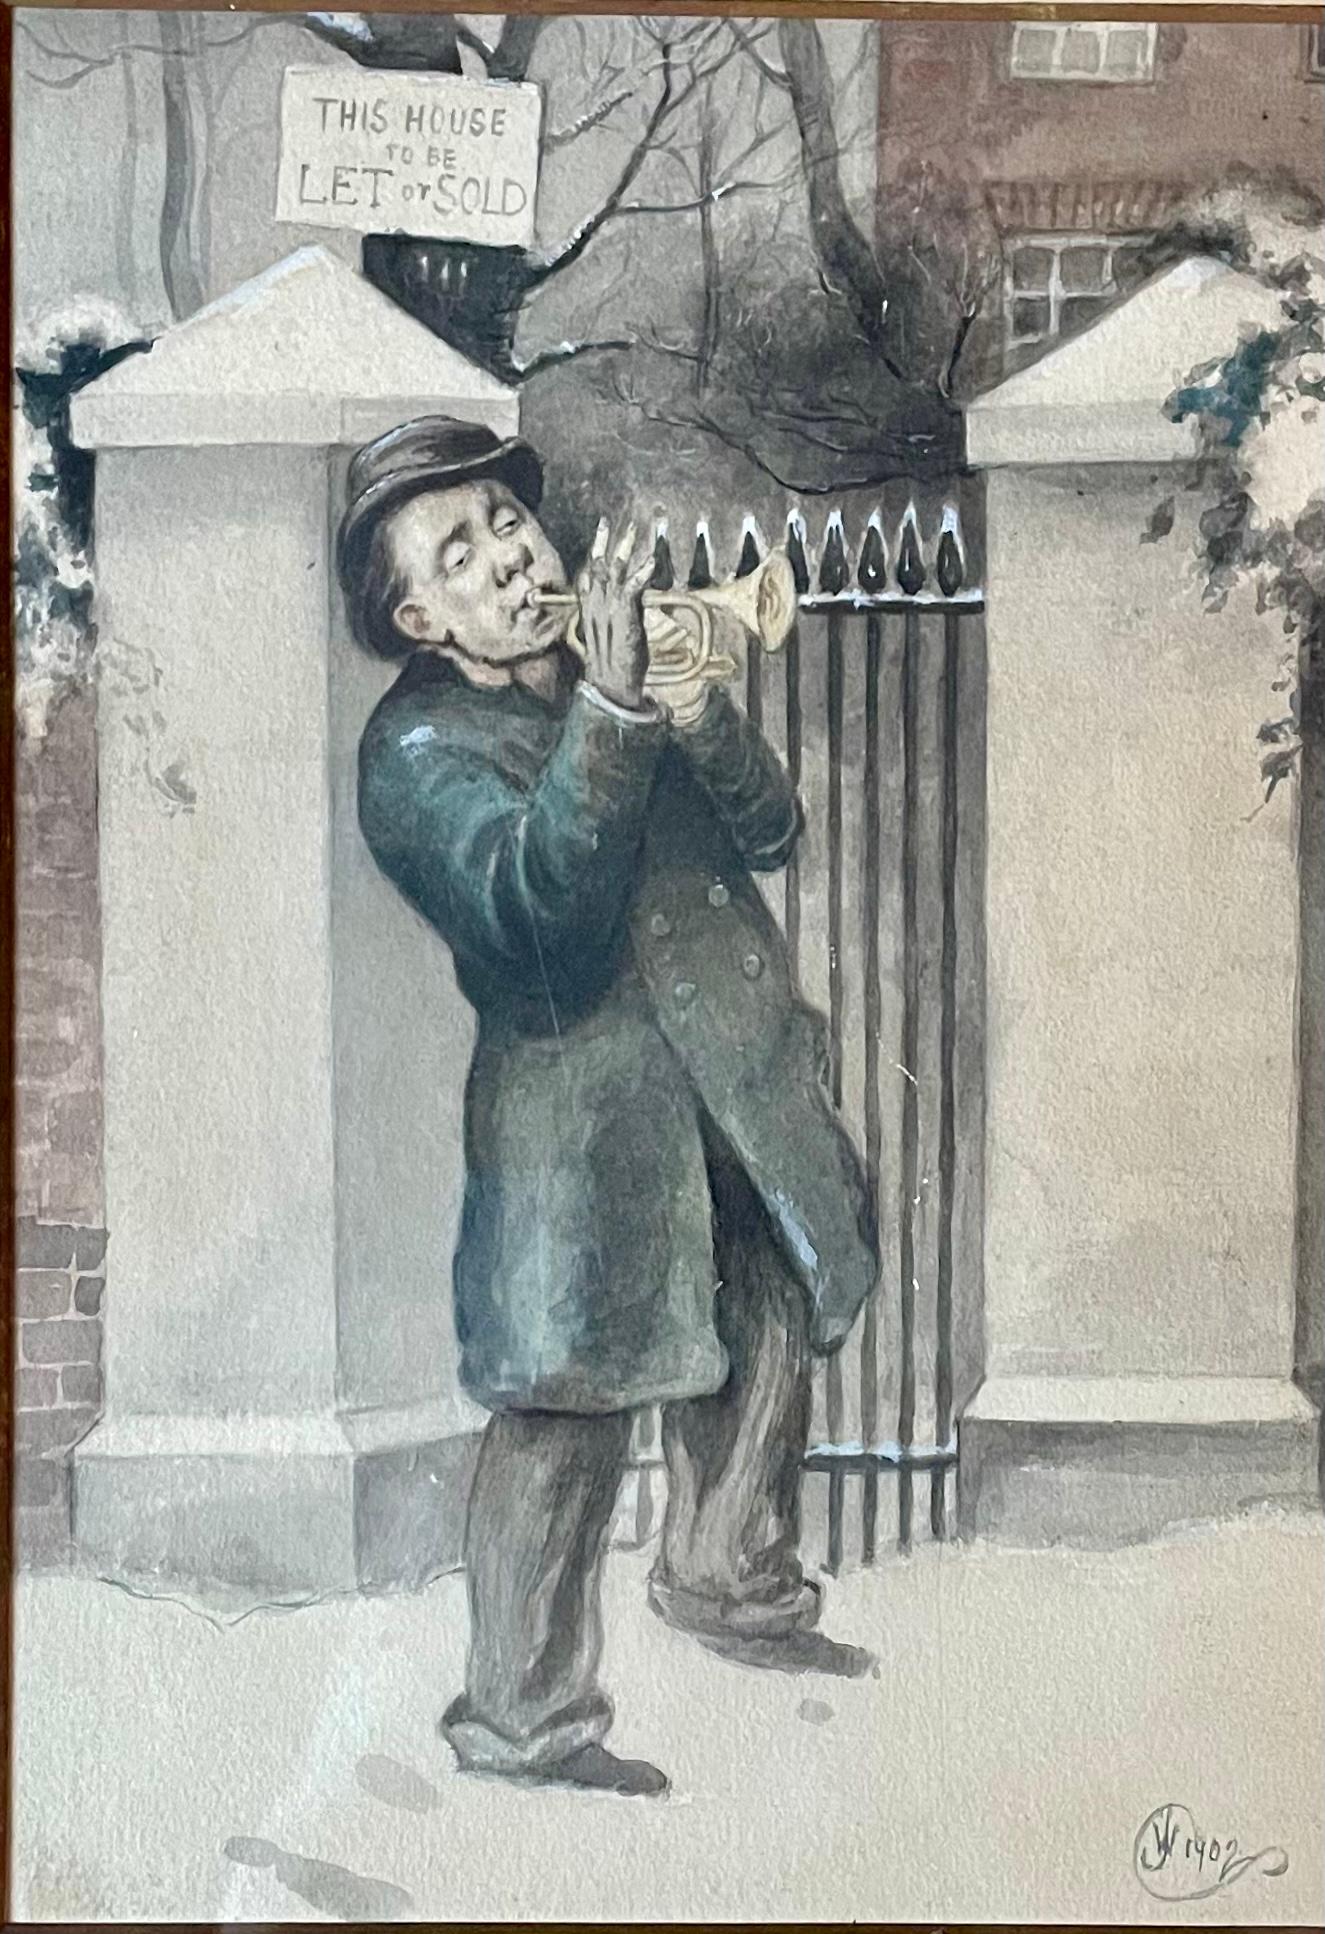 An English Caricature Watercolour painting signed with the artists monogram & dated 1902 .

A beautiful painting of a tamp playing a trumpet on a winters day , outside a house that is for sale or to let . 

( It makes me wonder if the tramp